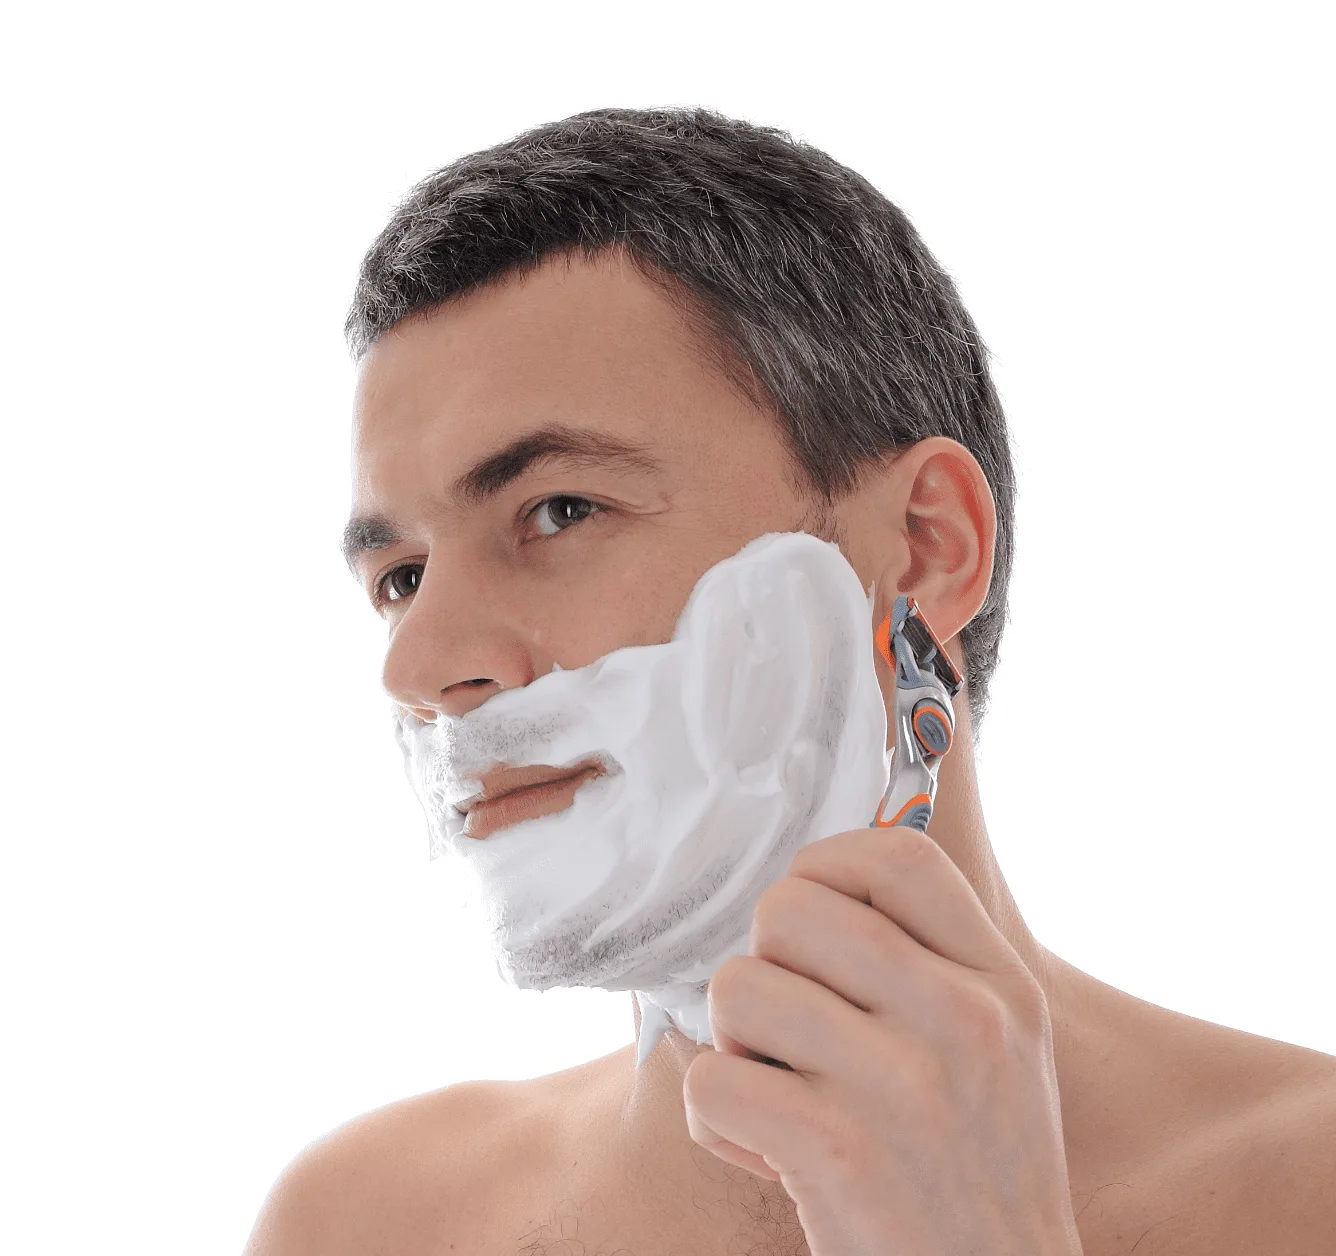 Comfortable shave